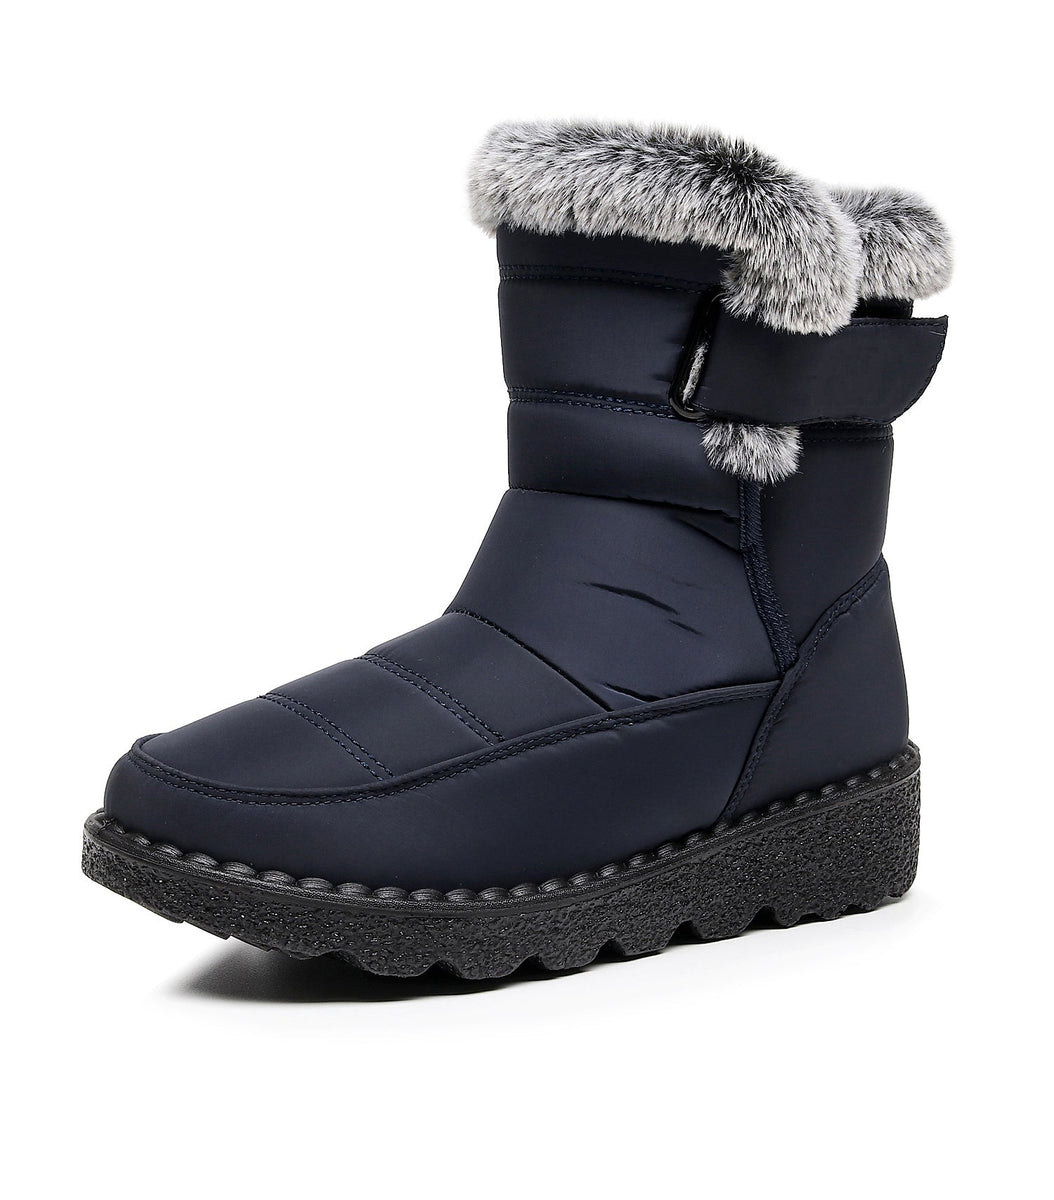 Women's Winter Snow Boots with Warm Lining Comfortable Non-slip Ankle ...